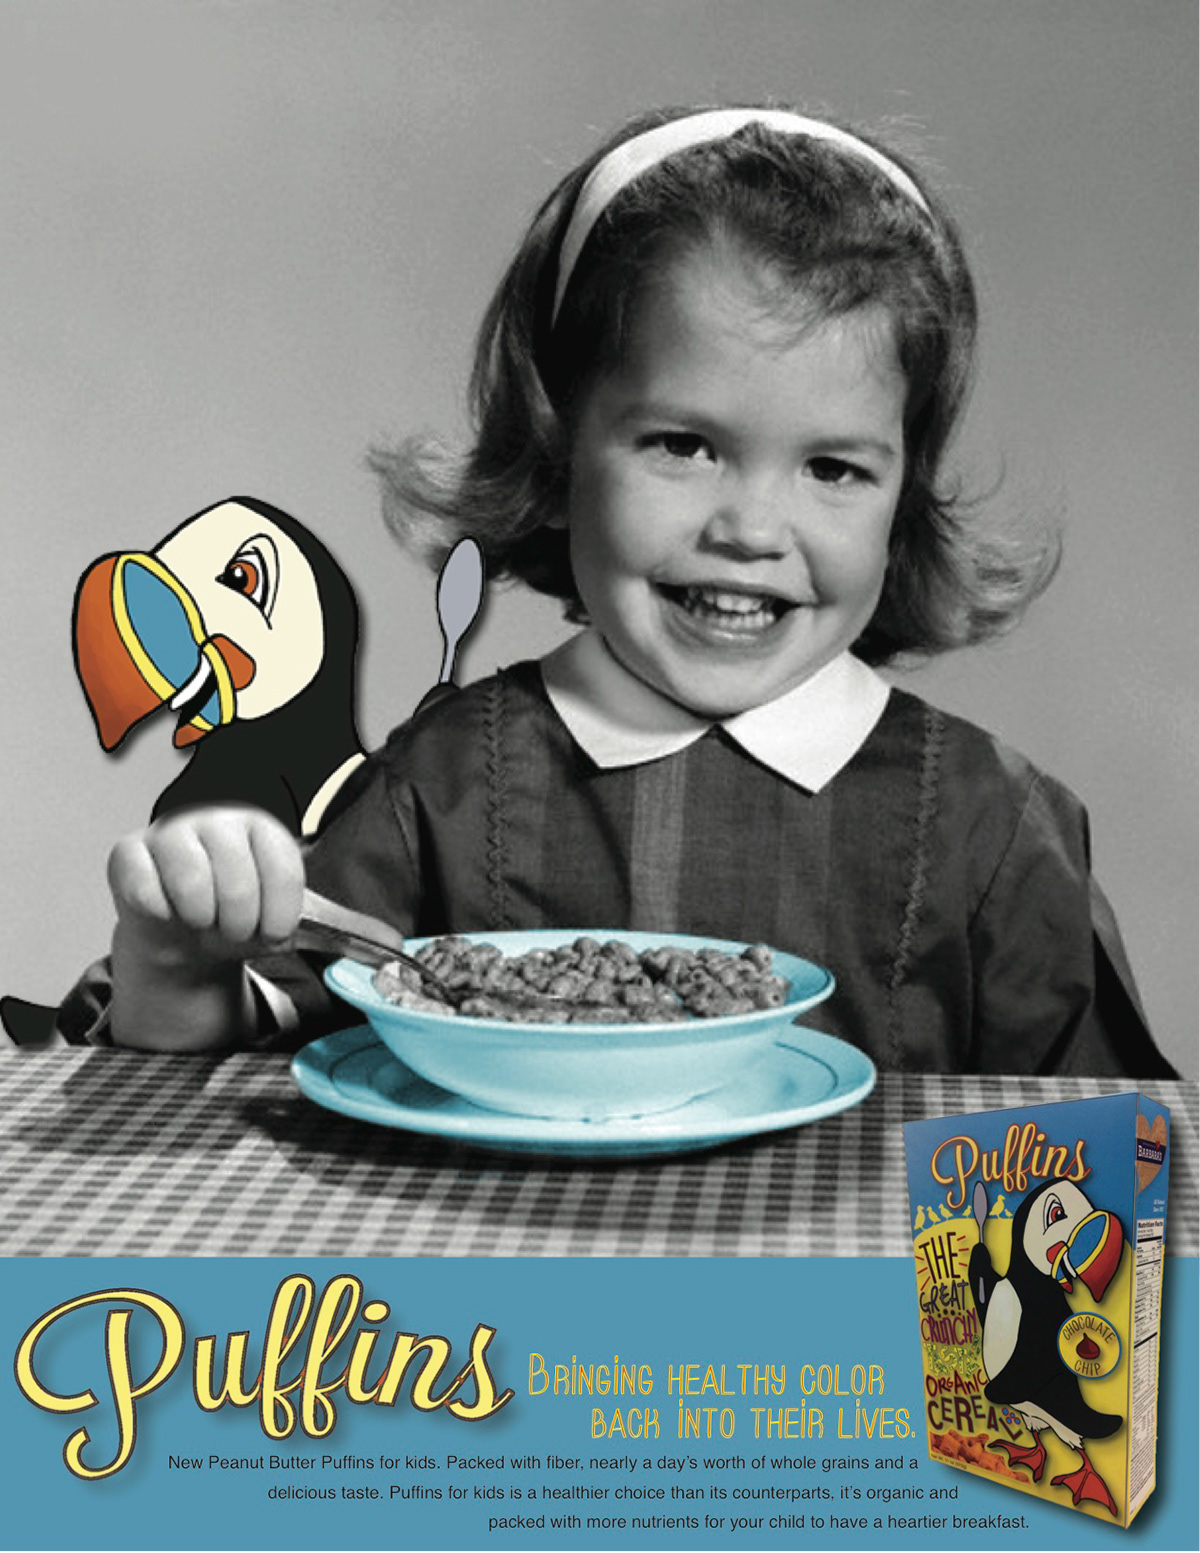 Cereal puffins healthy kids